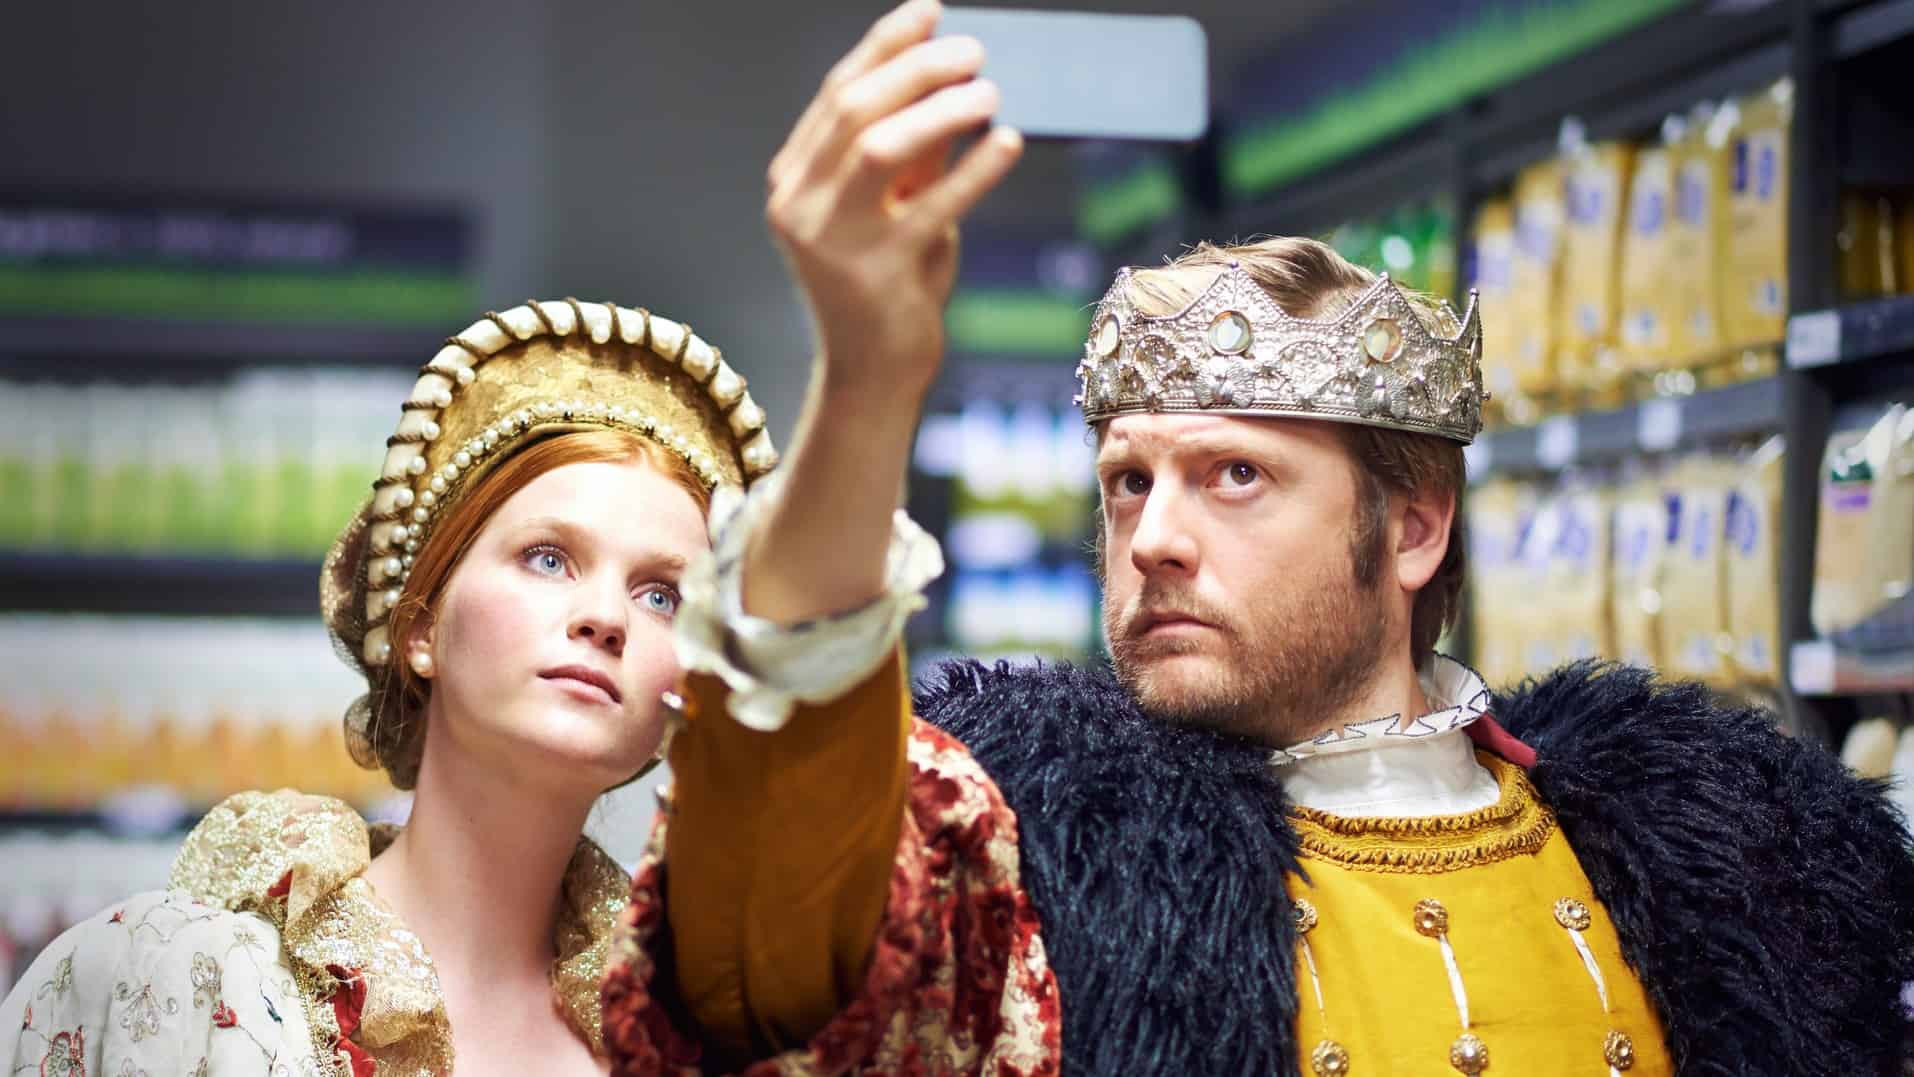 a man and a woman in historical costume, Henry the eitghth era, post for a selfie with the man holding a phone above their heads while the two pose with serious faces as seen in historical portraits of people.